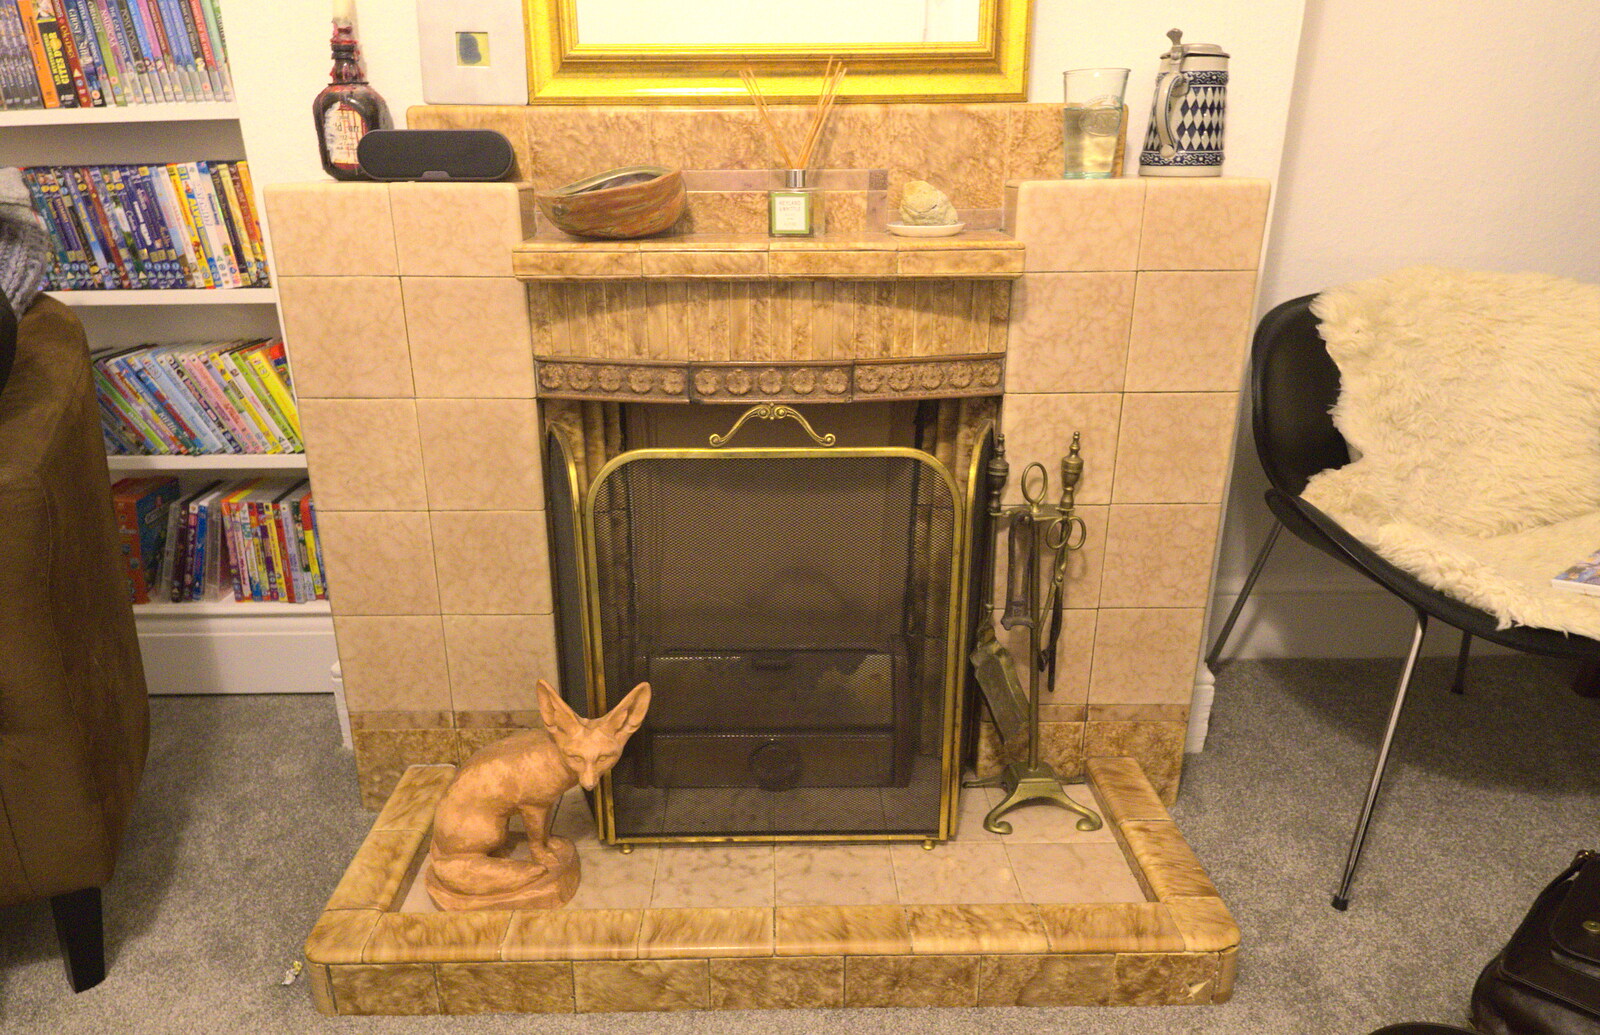 Classic 1930s fireplace from Fondue with the Swiss Massive, Gwydir Street, Cambridge - 19th November 2016